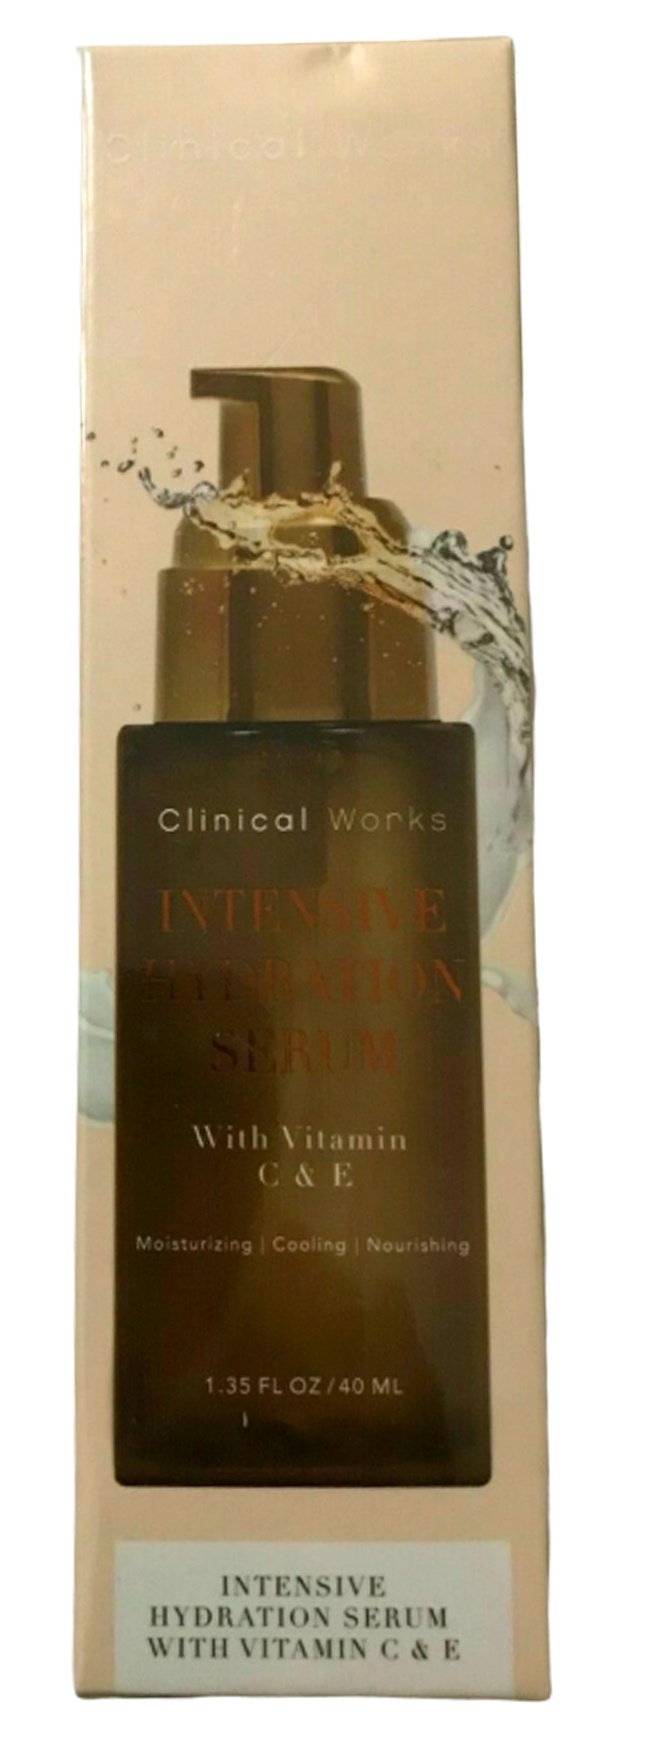 Clinical Works Intensive Hydration Serum